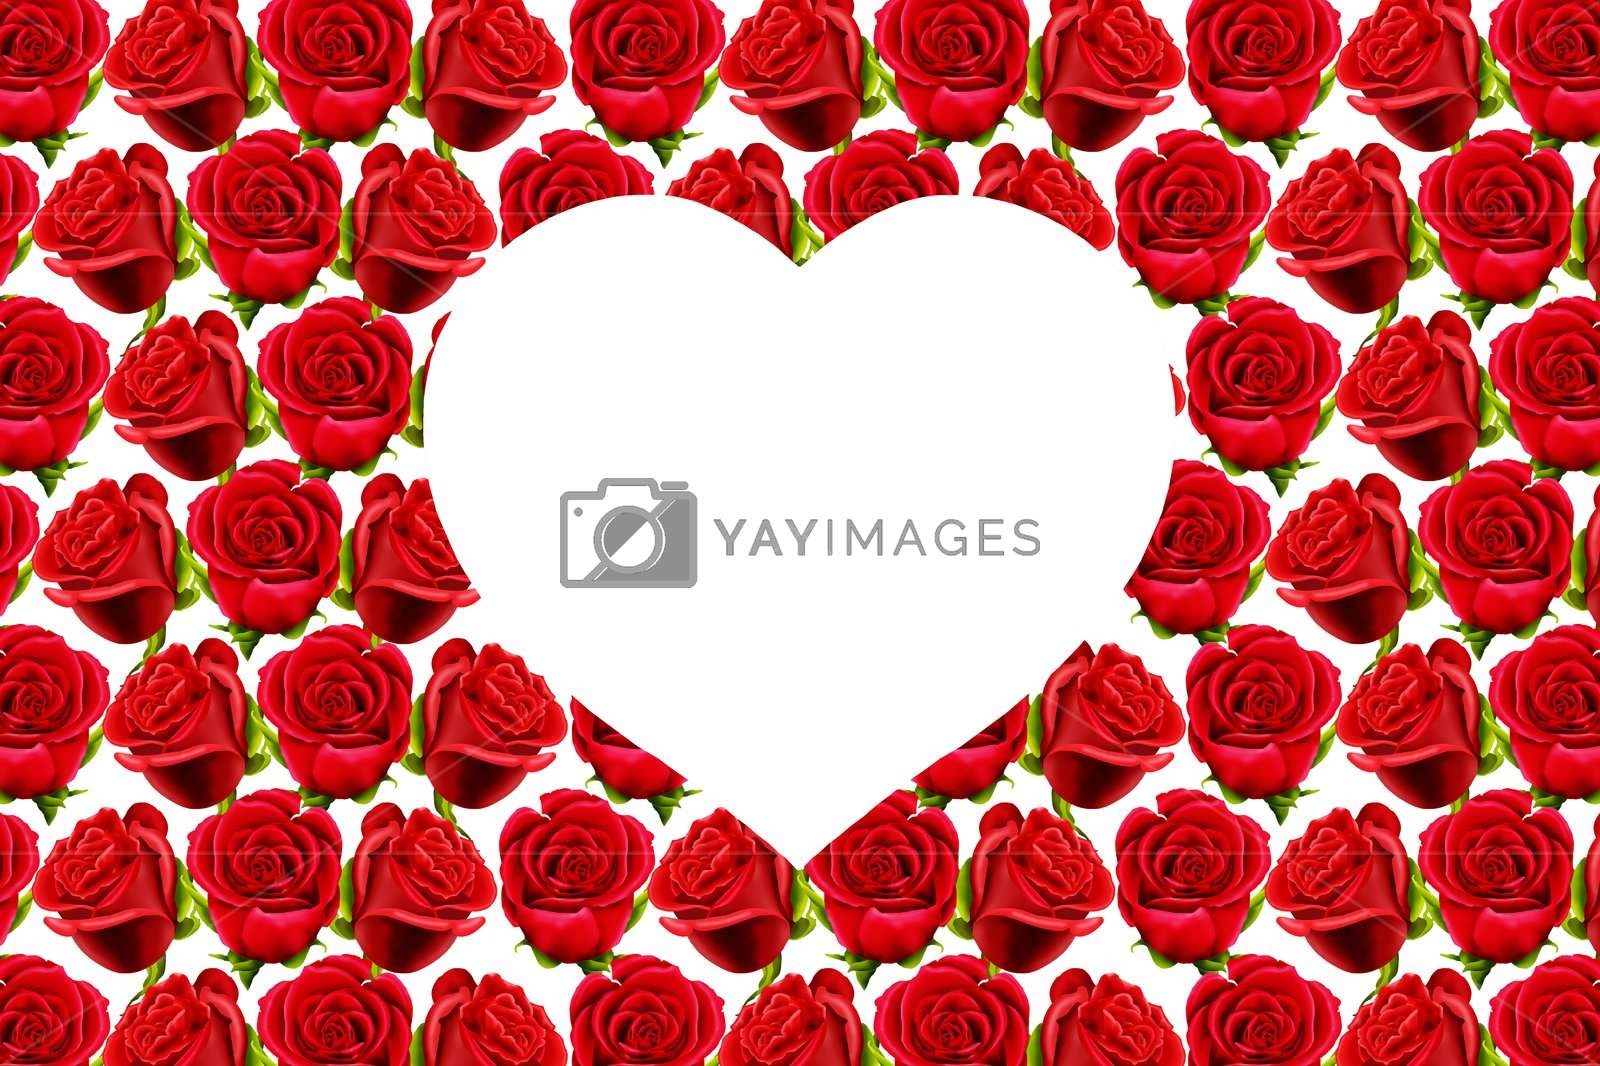 Wallpaper Of Red Roses With A White Heart By Acremead - Stock Photography - HD Wallpaper 